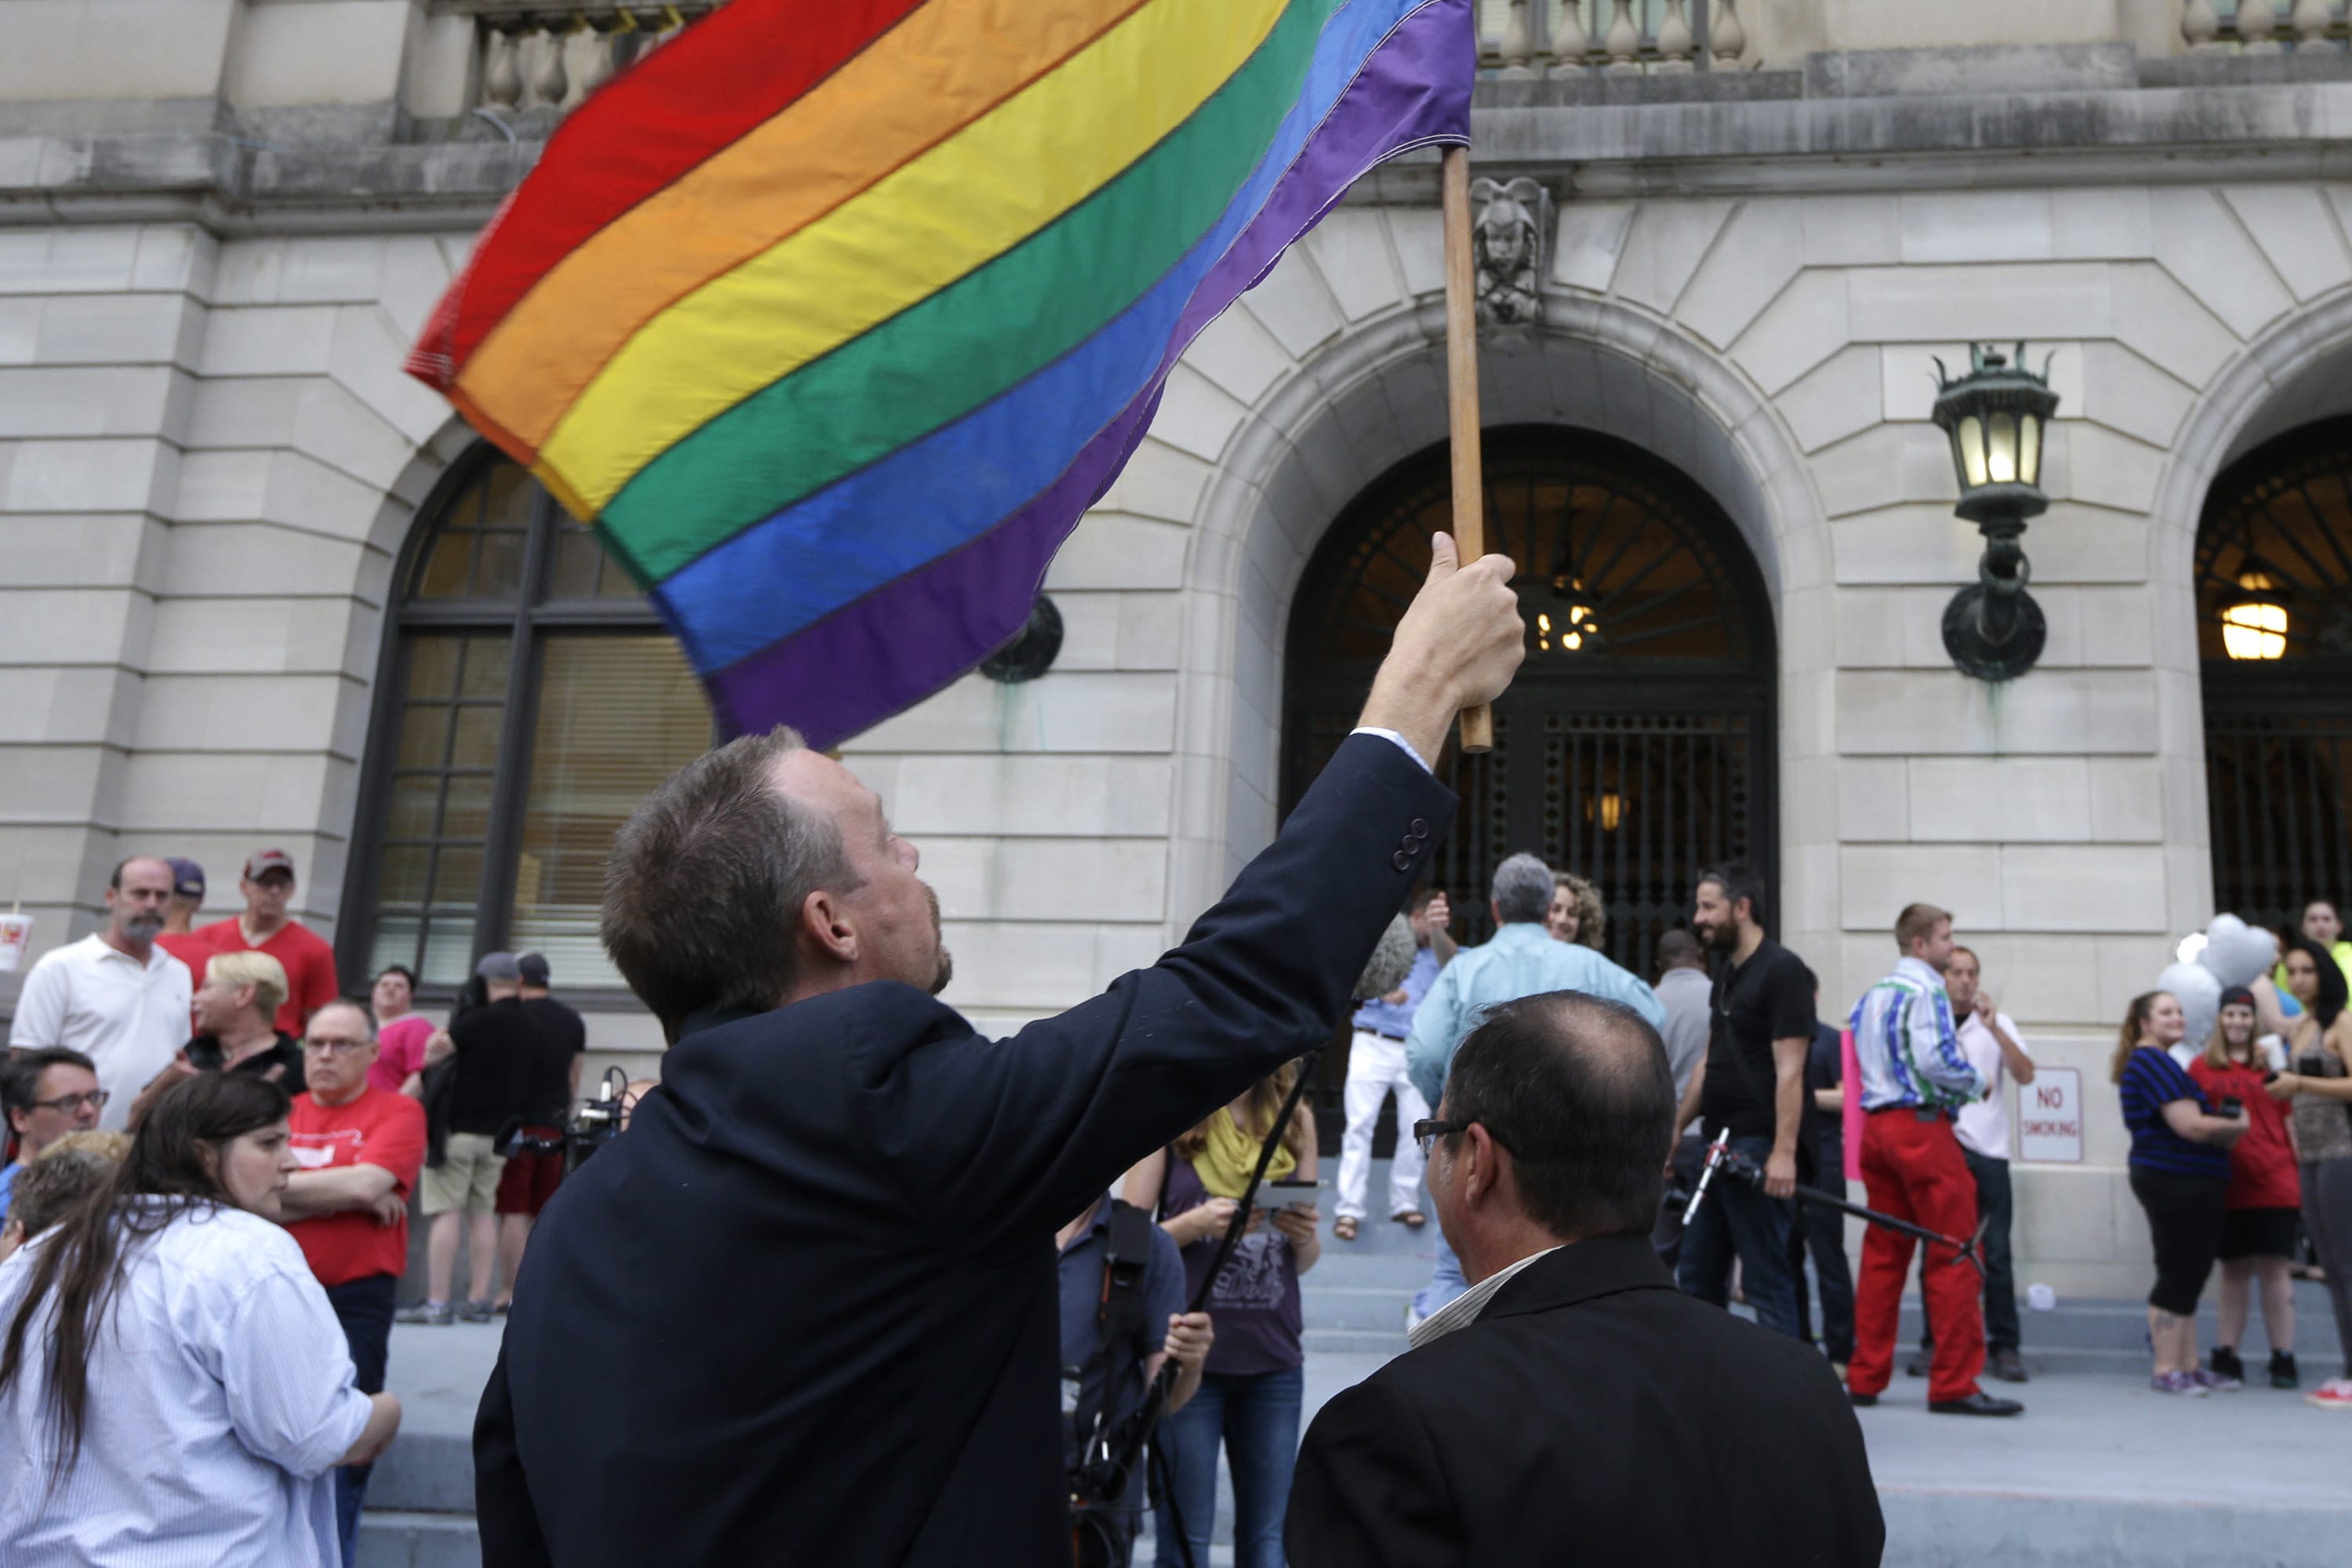 Same-sex marriage supporter Shon DeAmon holds a flag as his partner James Porter, right, watches at the Pulaski County Courthouse in Little Rock, Ark., on Monday.